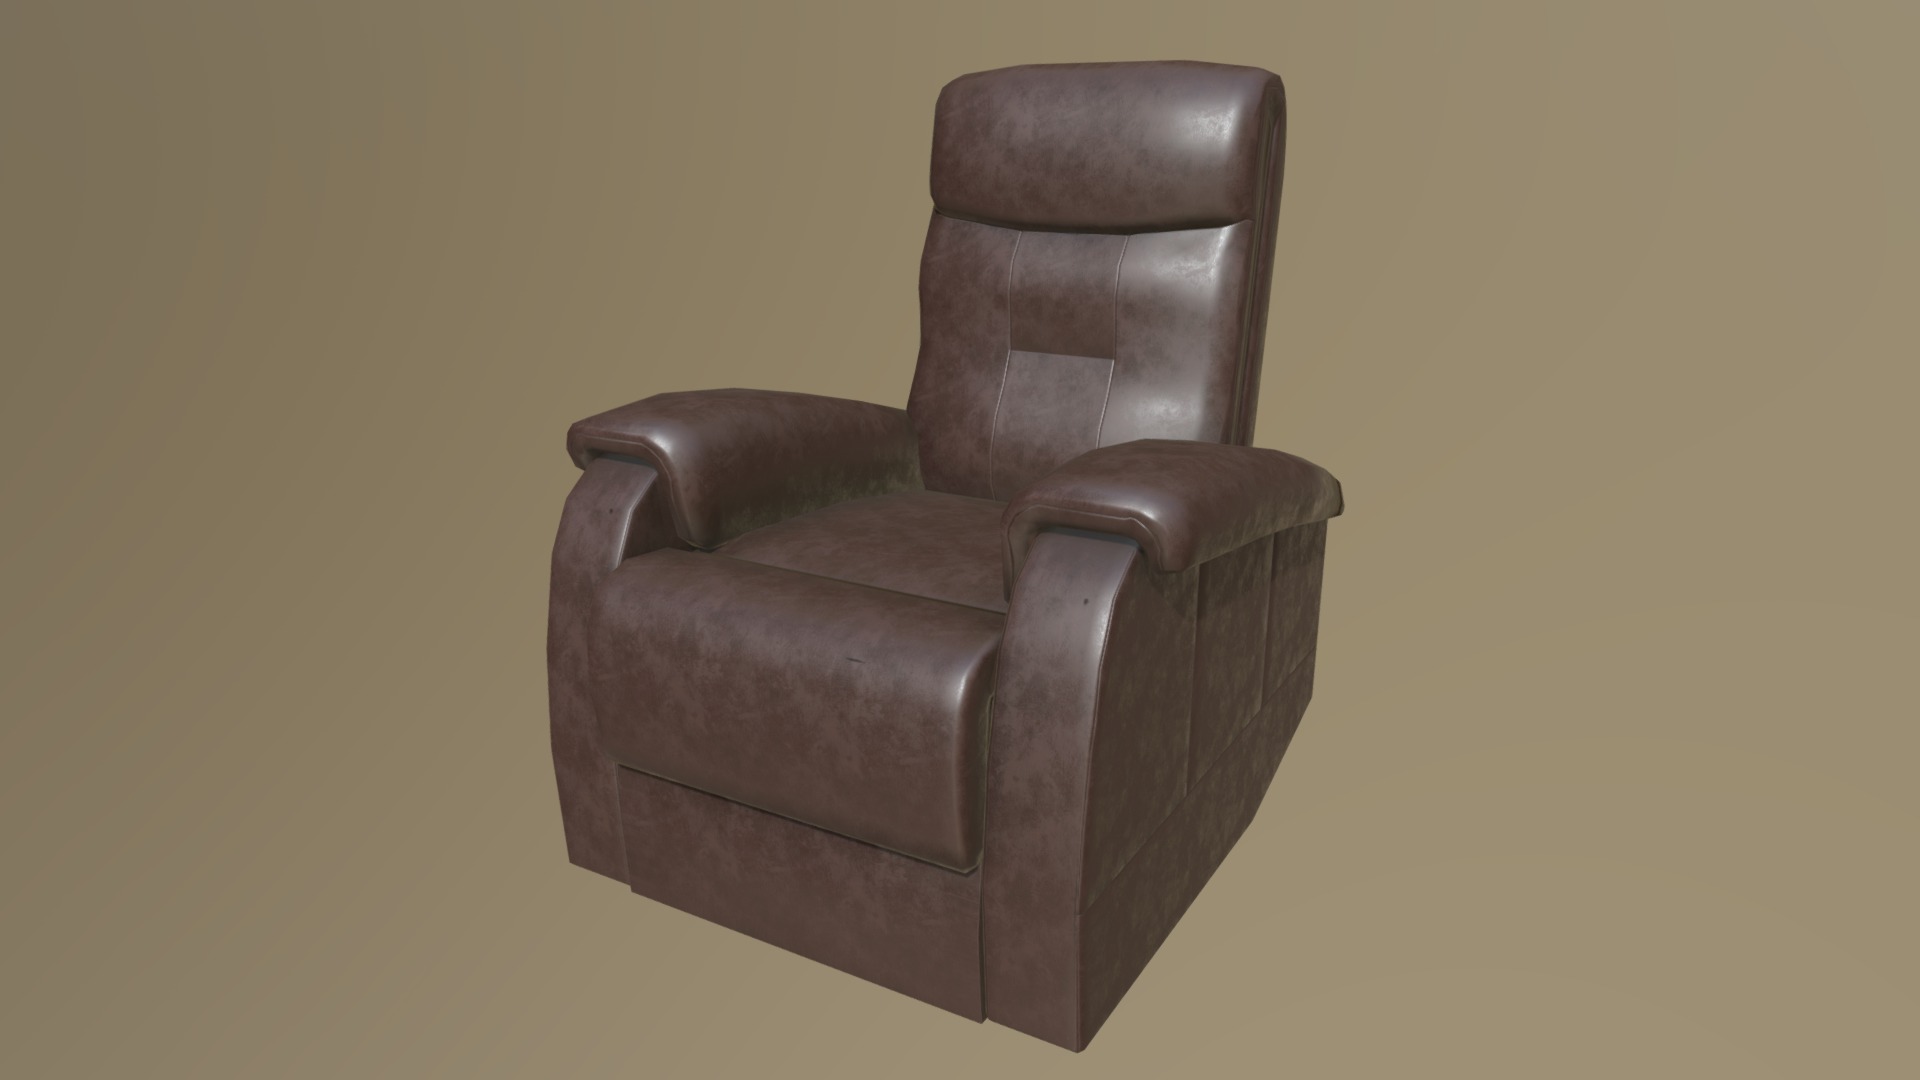 3D model Choco chair - This is a 3D model of the Choco chair. The 3D model is about a brown leather chair.